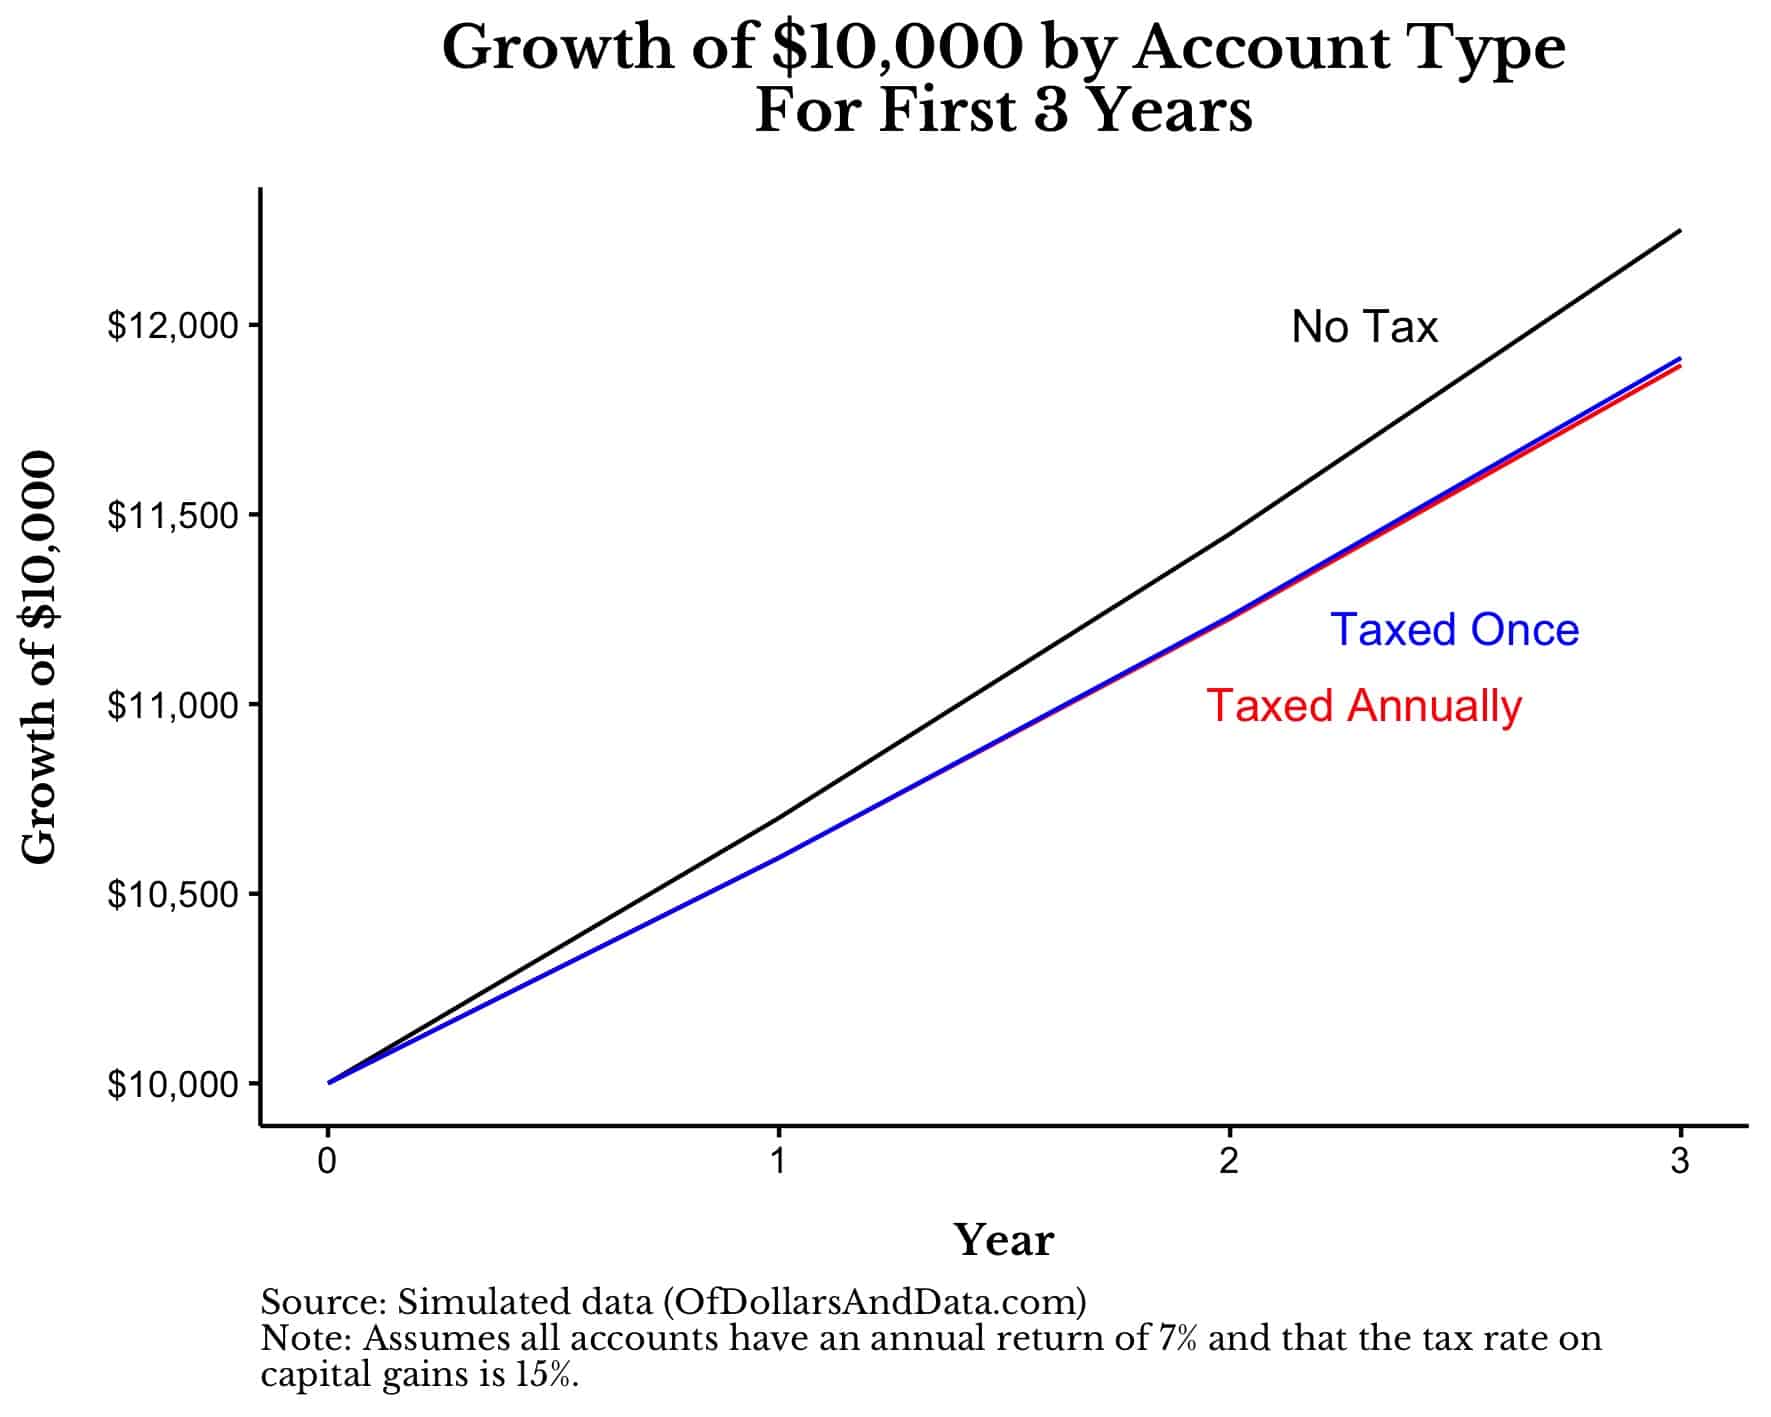 Growth of $10,000 in hypothetical account by account type for first 3 years.